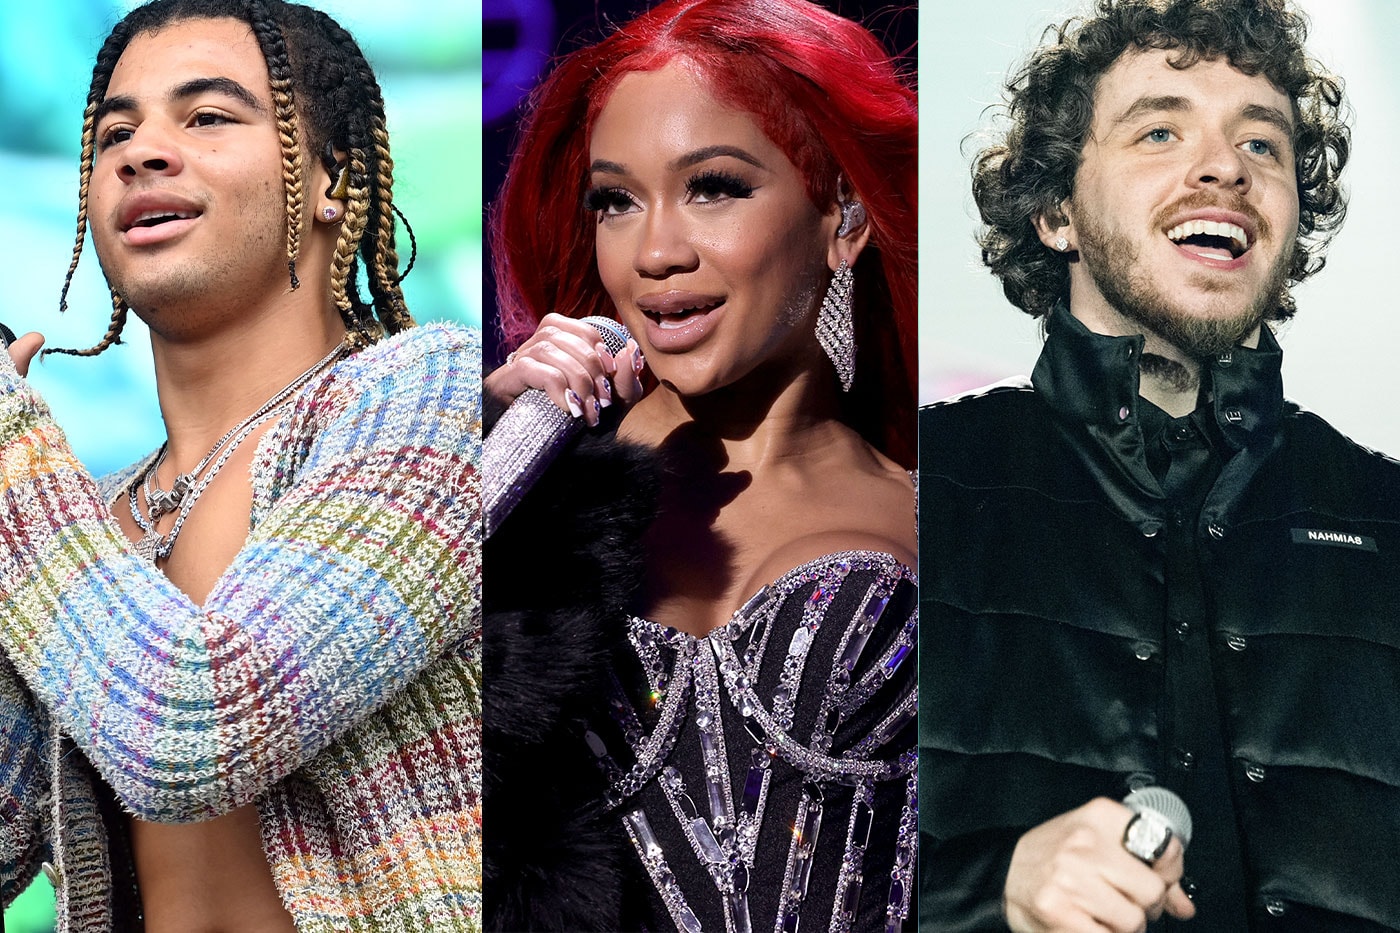 24kGoldn, Saweetie and More Announced To Perform at Miley Cyrus and Pete Davidson New Year's Eve Special saturday night live snl miami flordia nbc peacock carson daly 